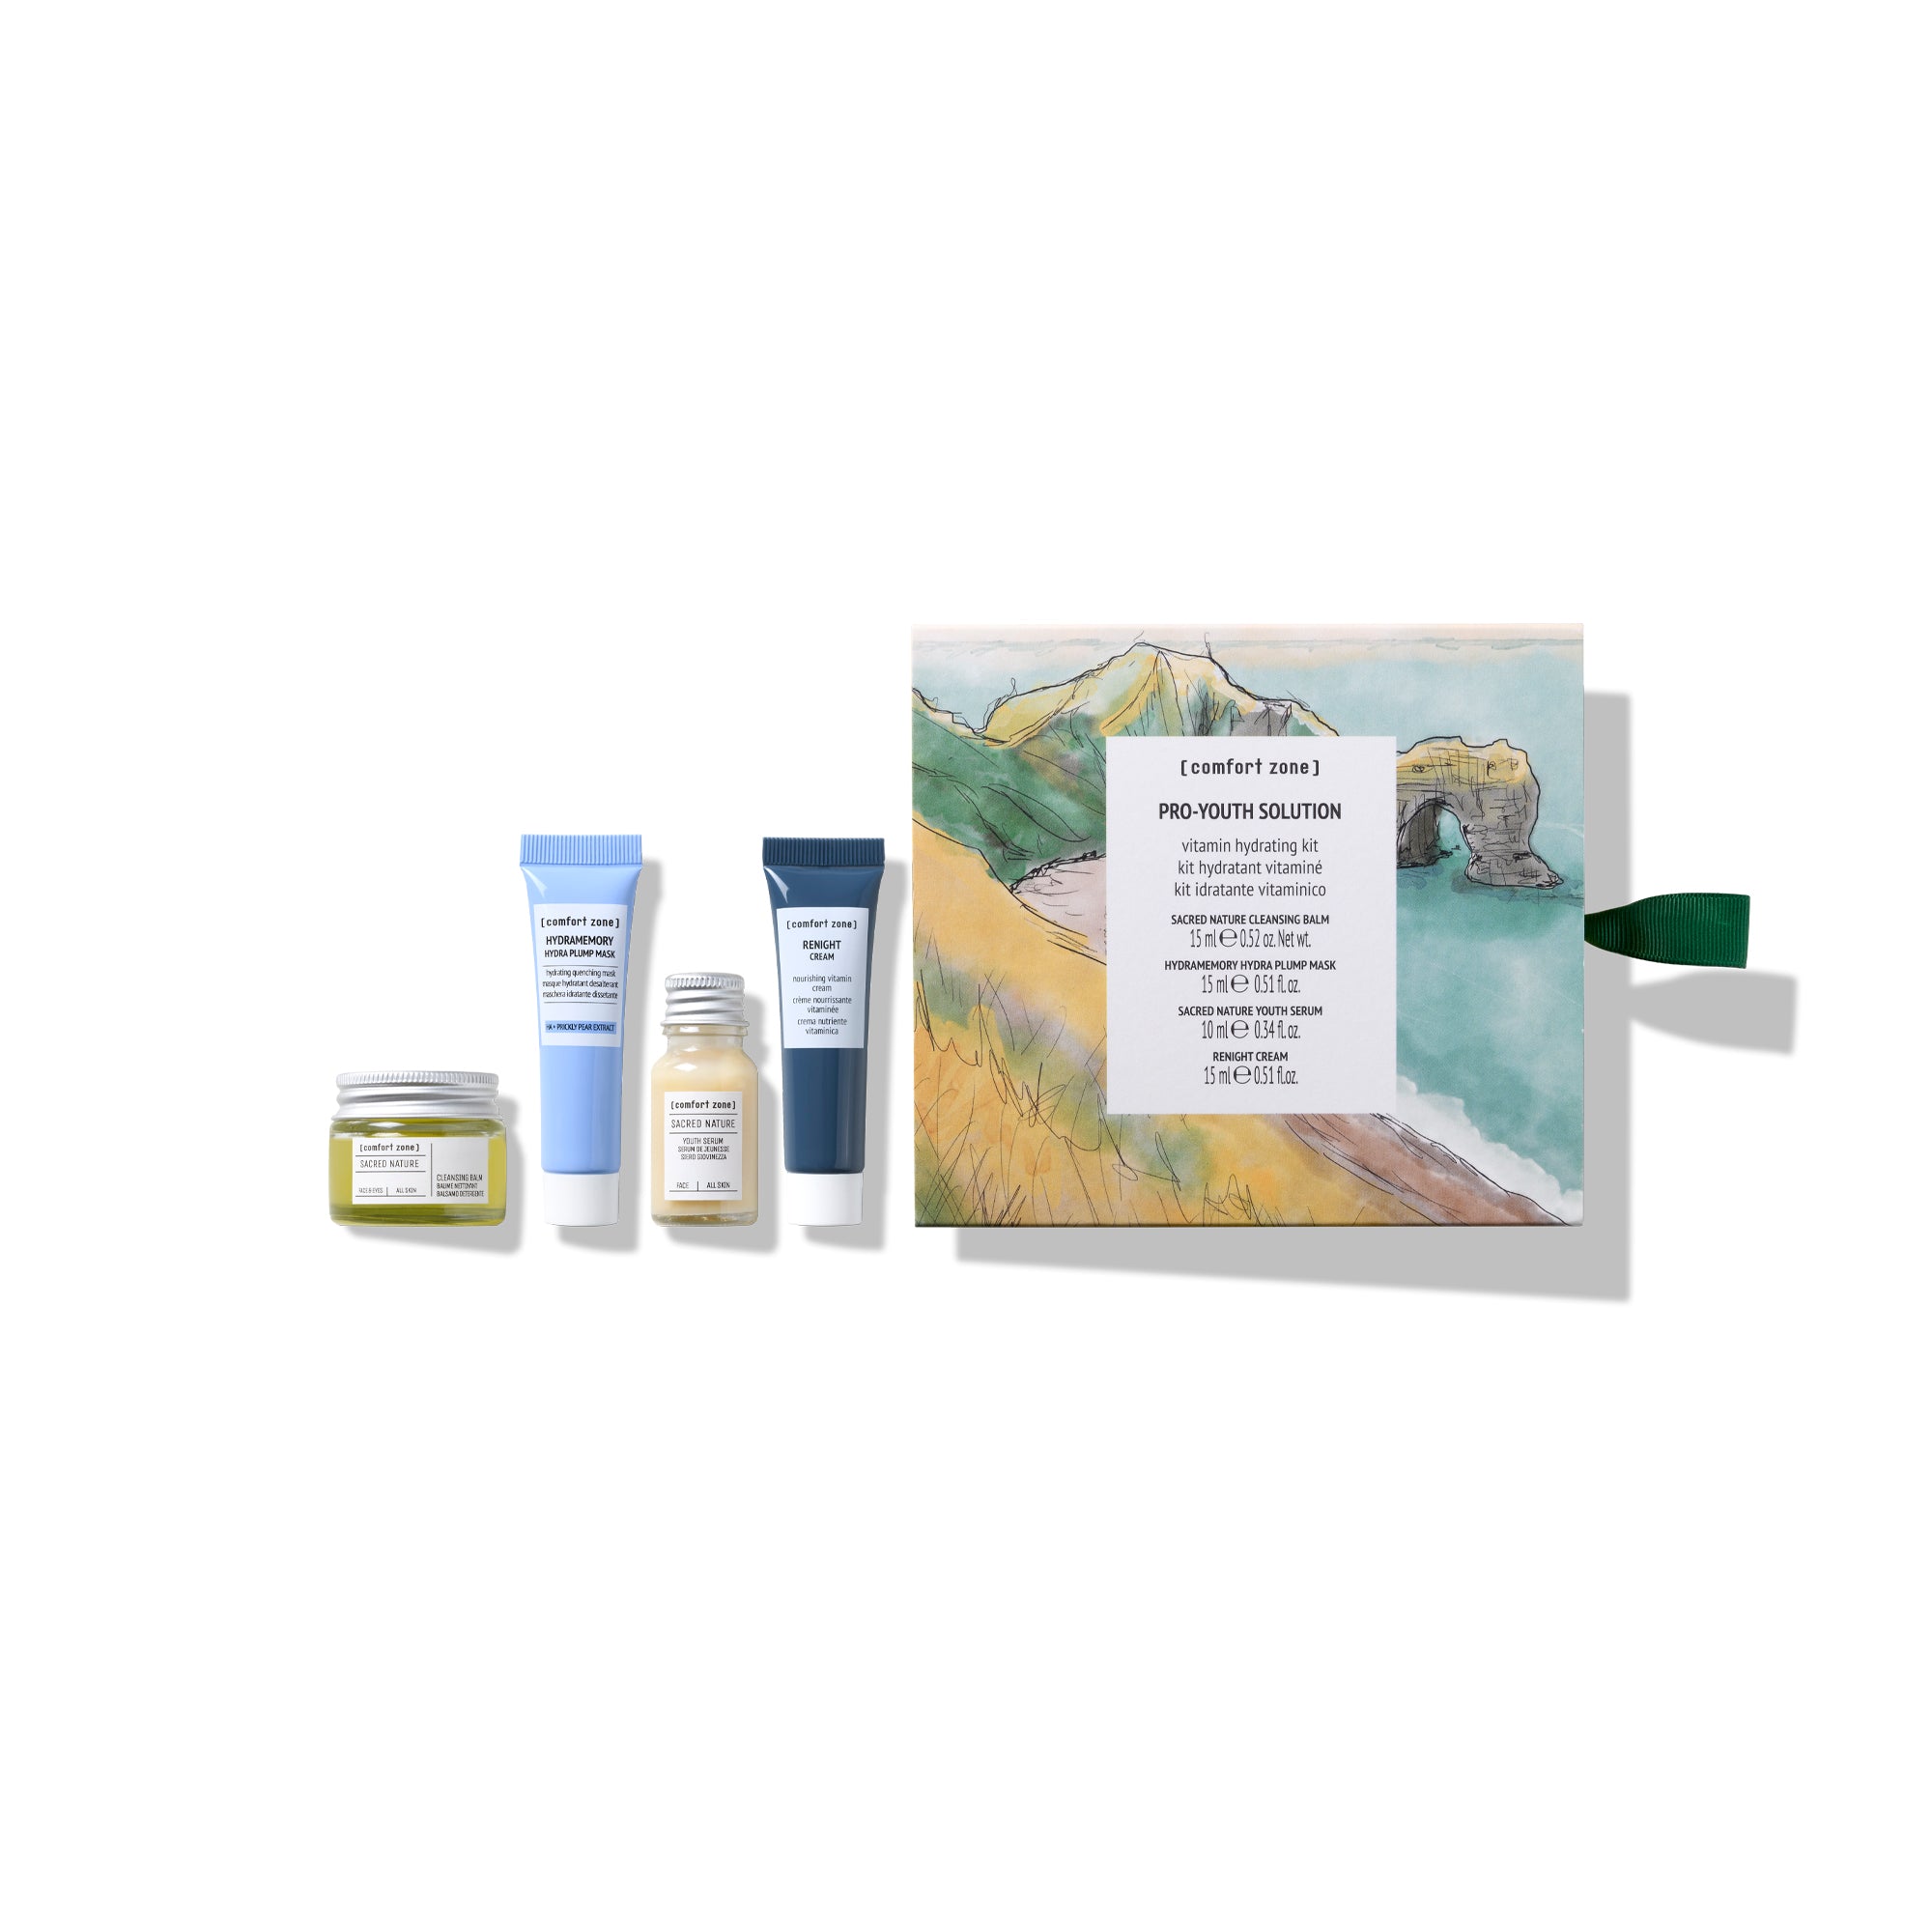 Comfort Zone: KIT PRO-YOUTH SOLUTION Vitamin hydrating kit<br>-
